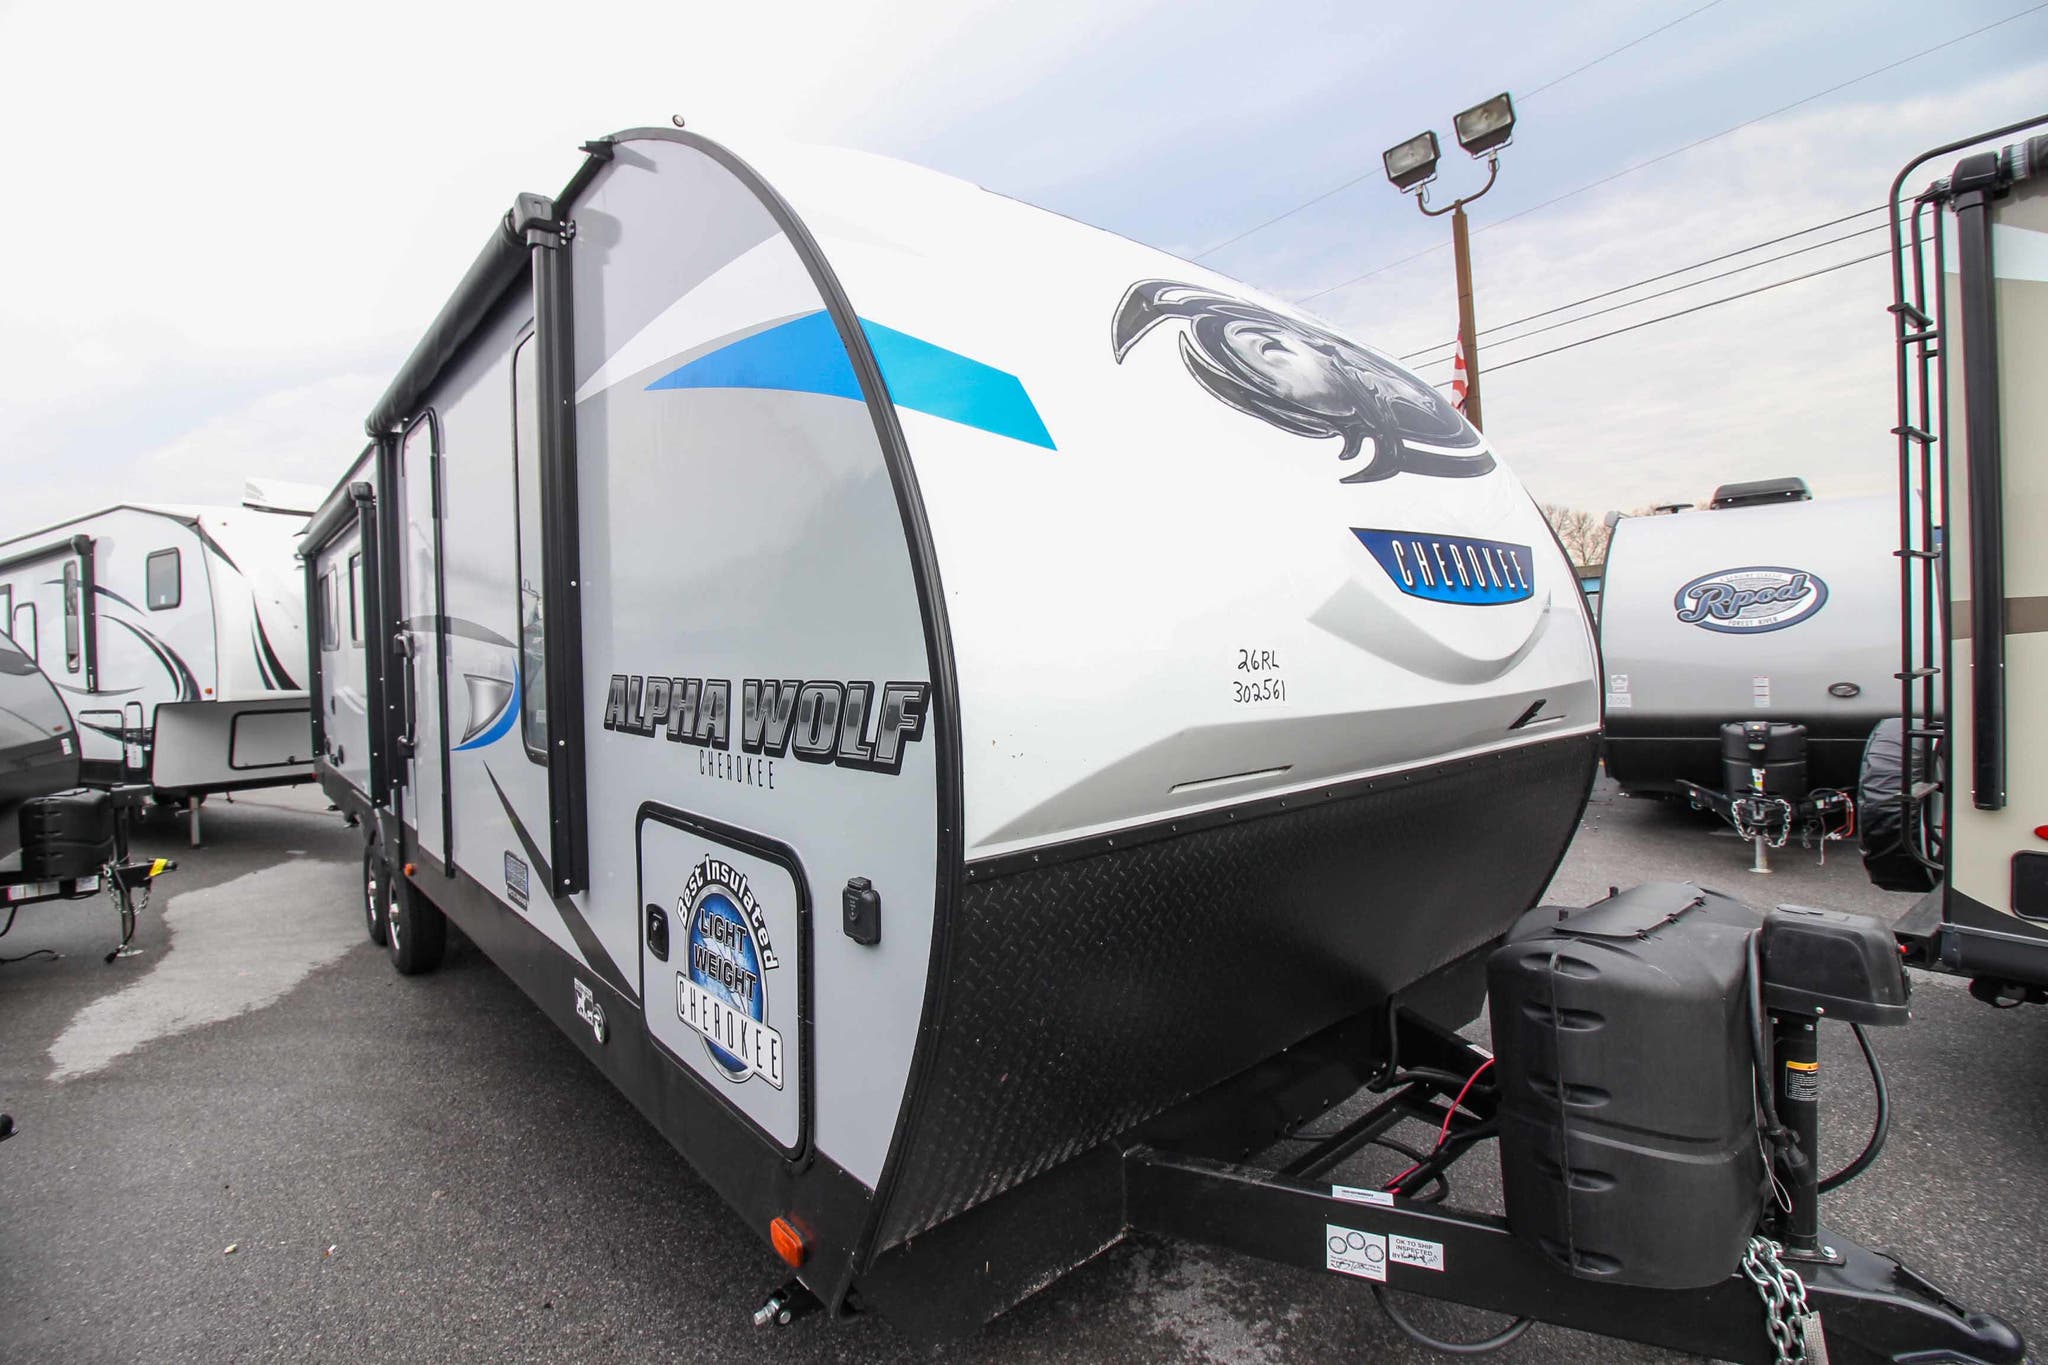 2020 Forest River Alpha Wolf 26RL-L | 2020 Motorhome in Greencastle PA | 5254619338 | Used 2020 Forest River Alpha Wolf 26rl L